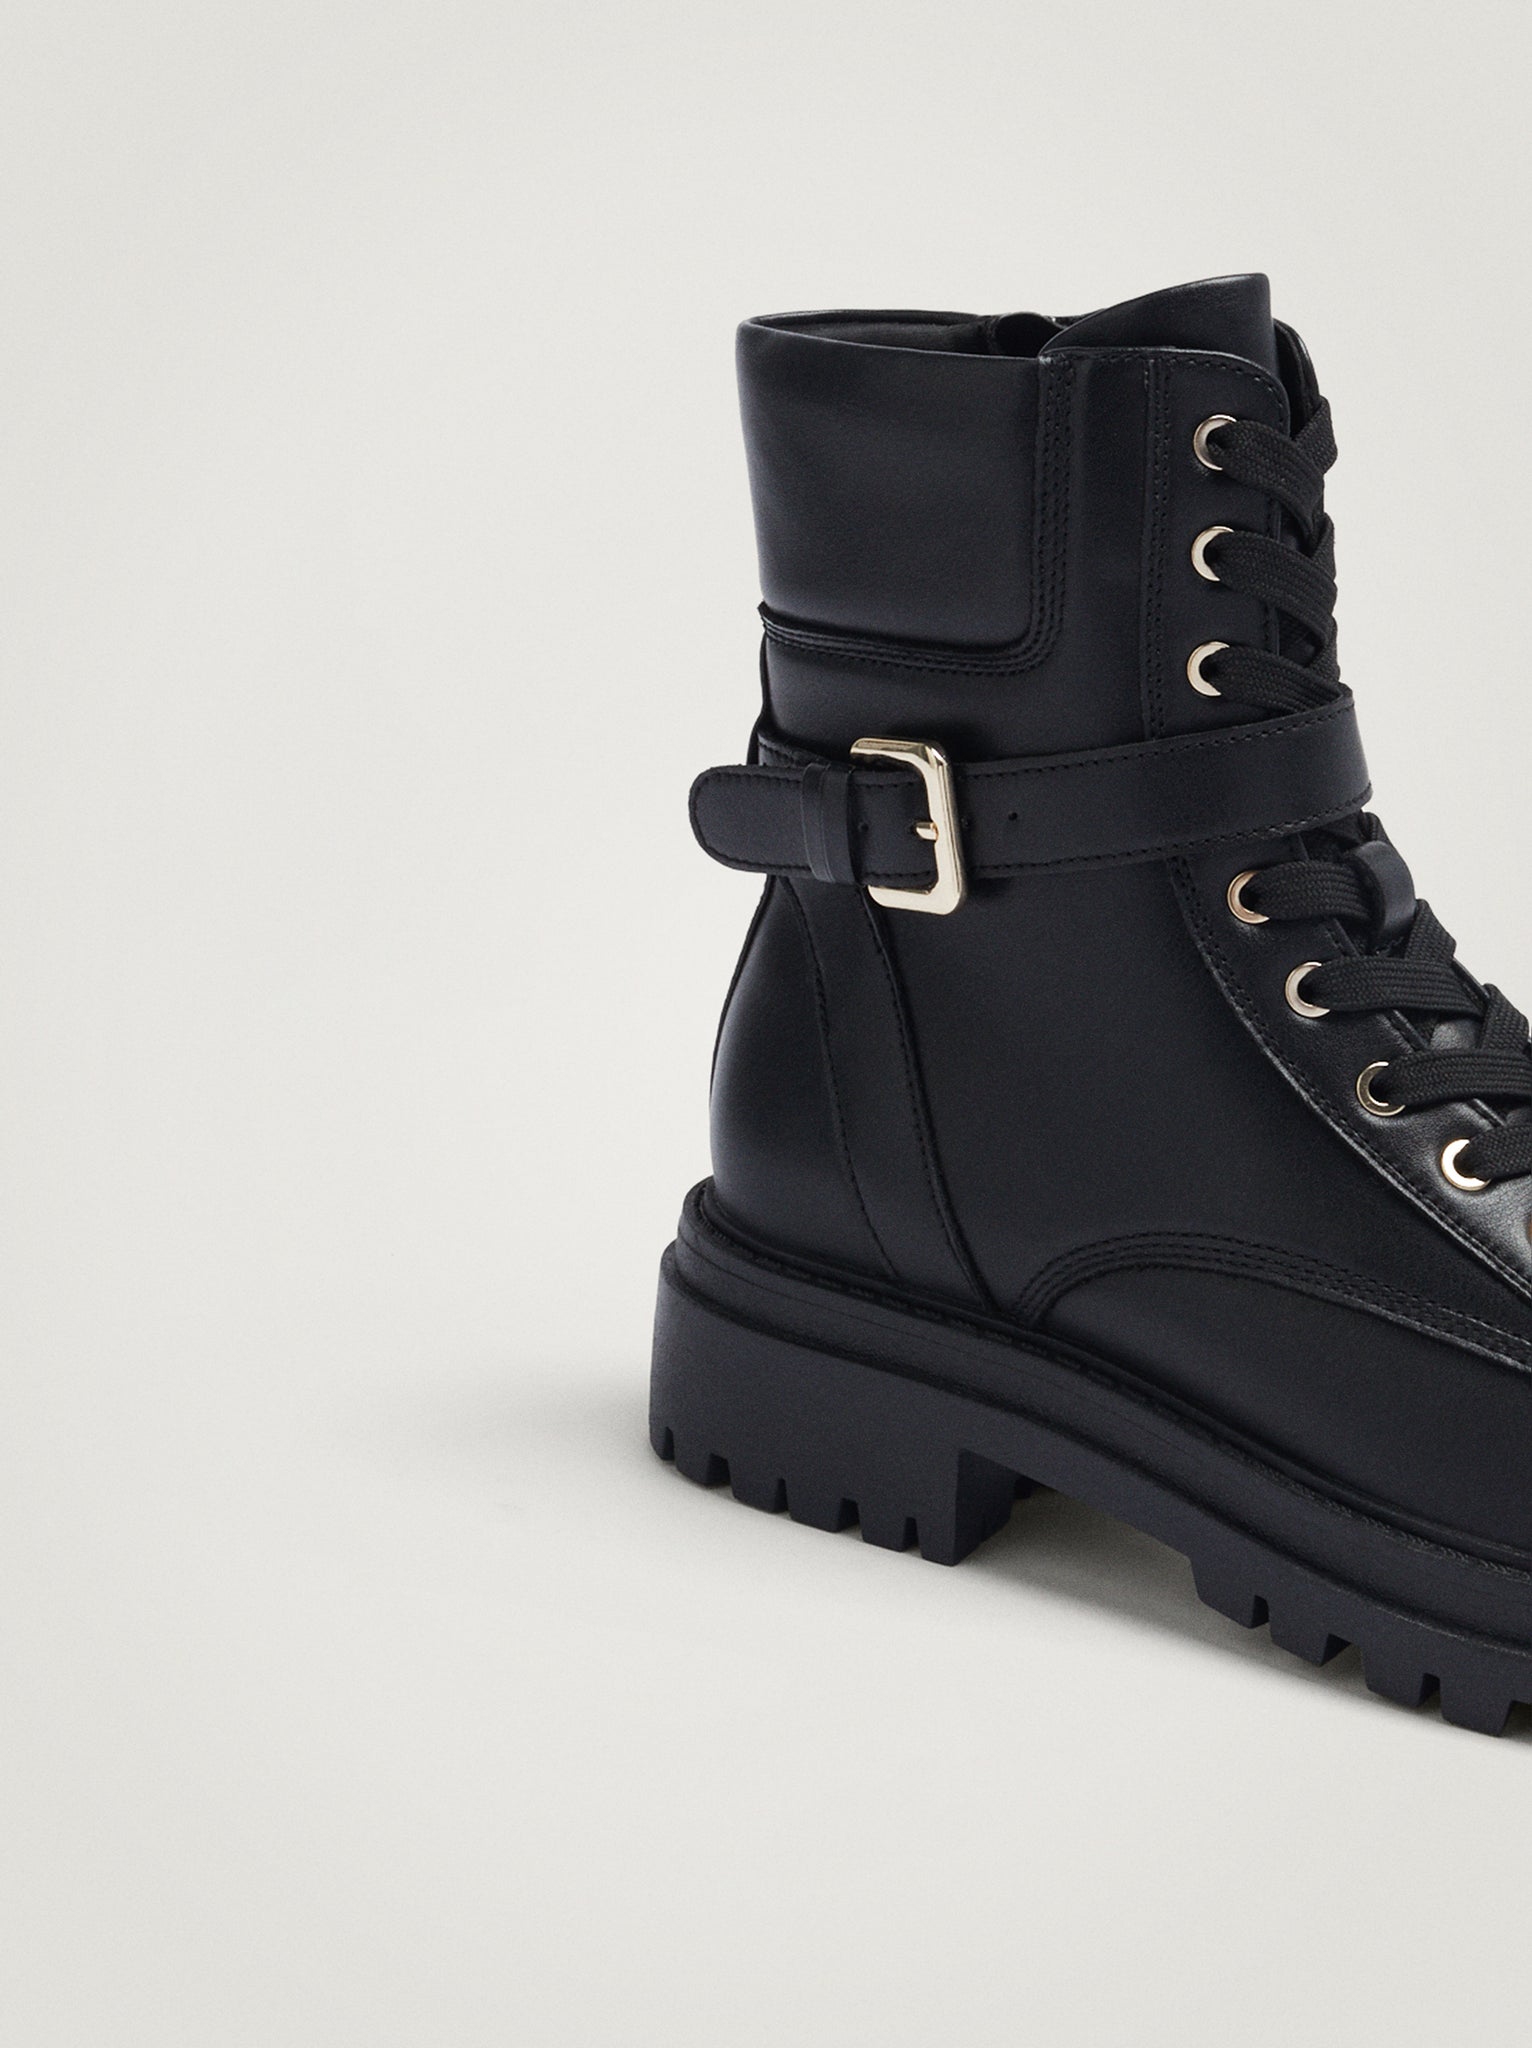 Military Boots With Buckle